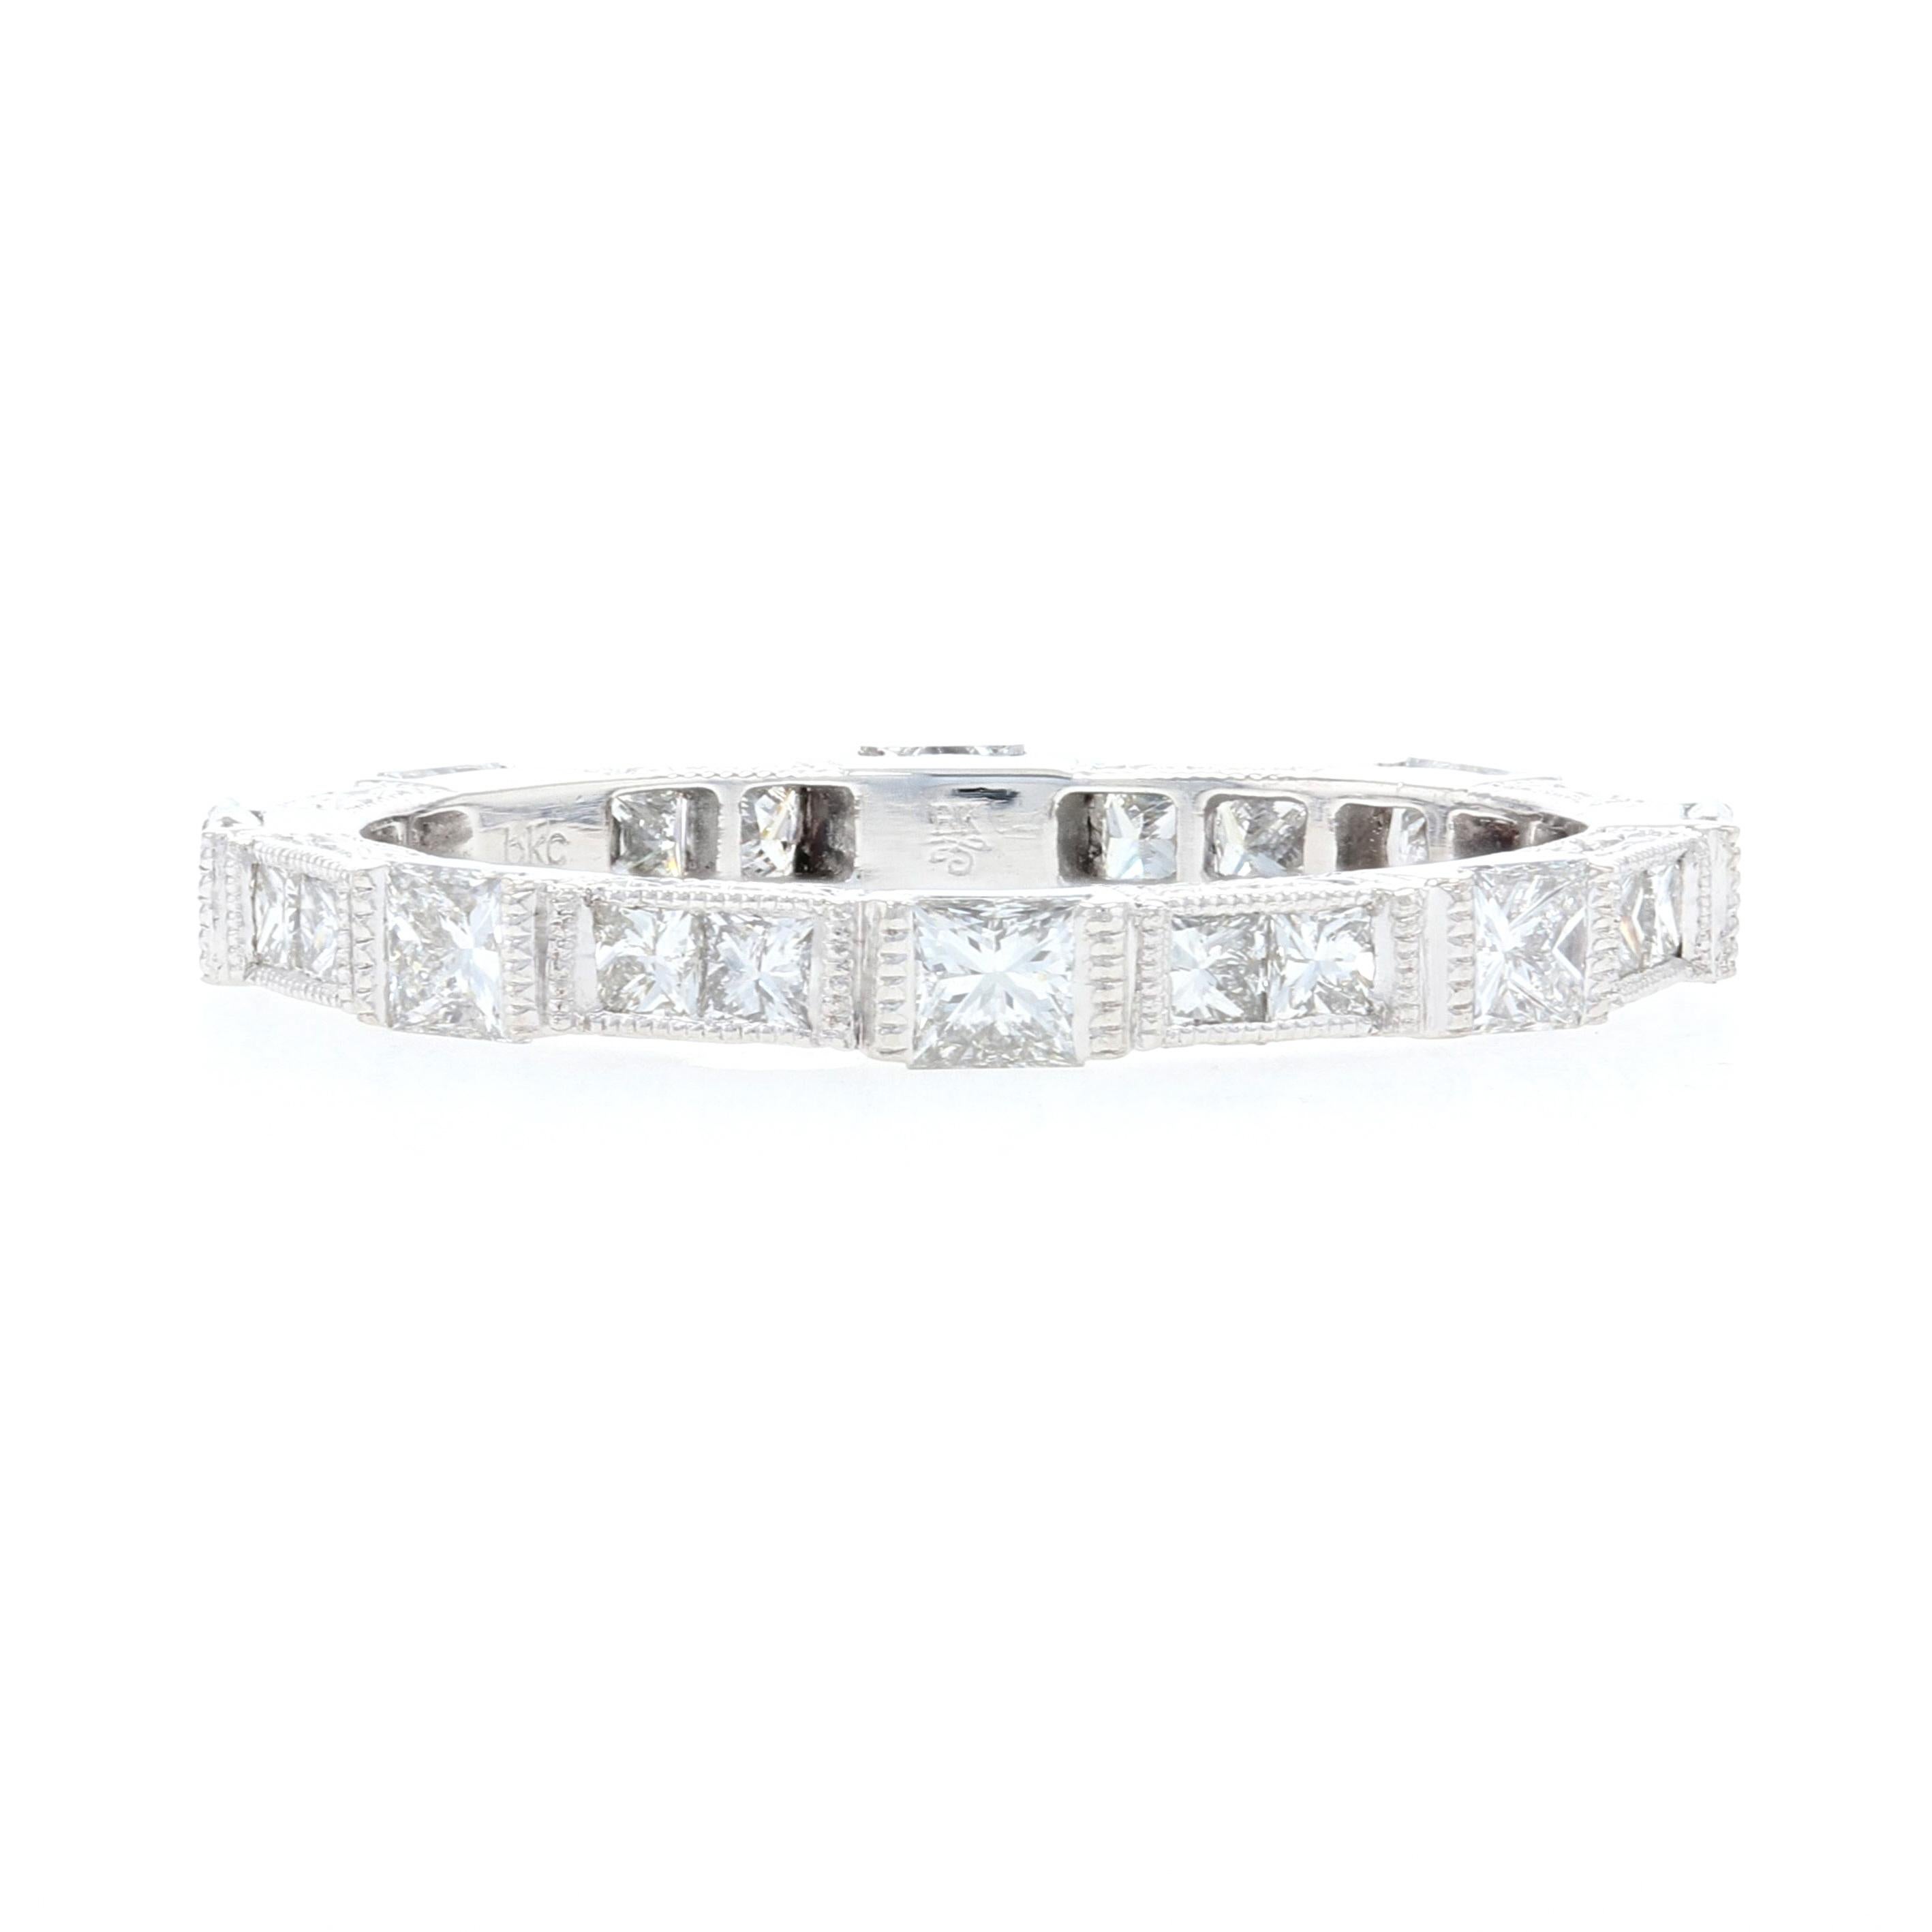 Size: 6 1/2

Brand: Beverly K.

Metal Content: 900 Platinum

Stone Information: 
Natural Diamonds  
Clarity: VS1 - VS2
Color: F - G 
Cut: Princess
Total Carats: 1.25ctw 

Style: Stackable Eternity Band
Face Height (north to south): 1/8